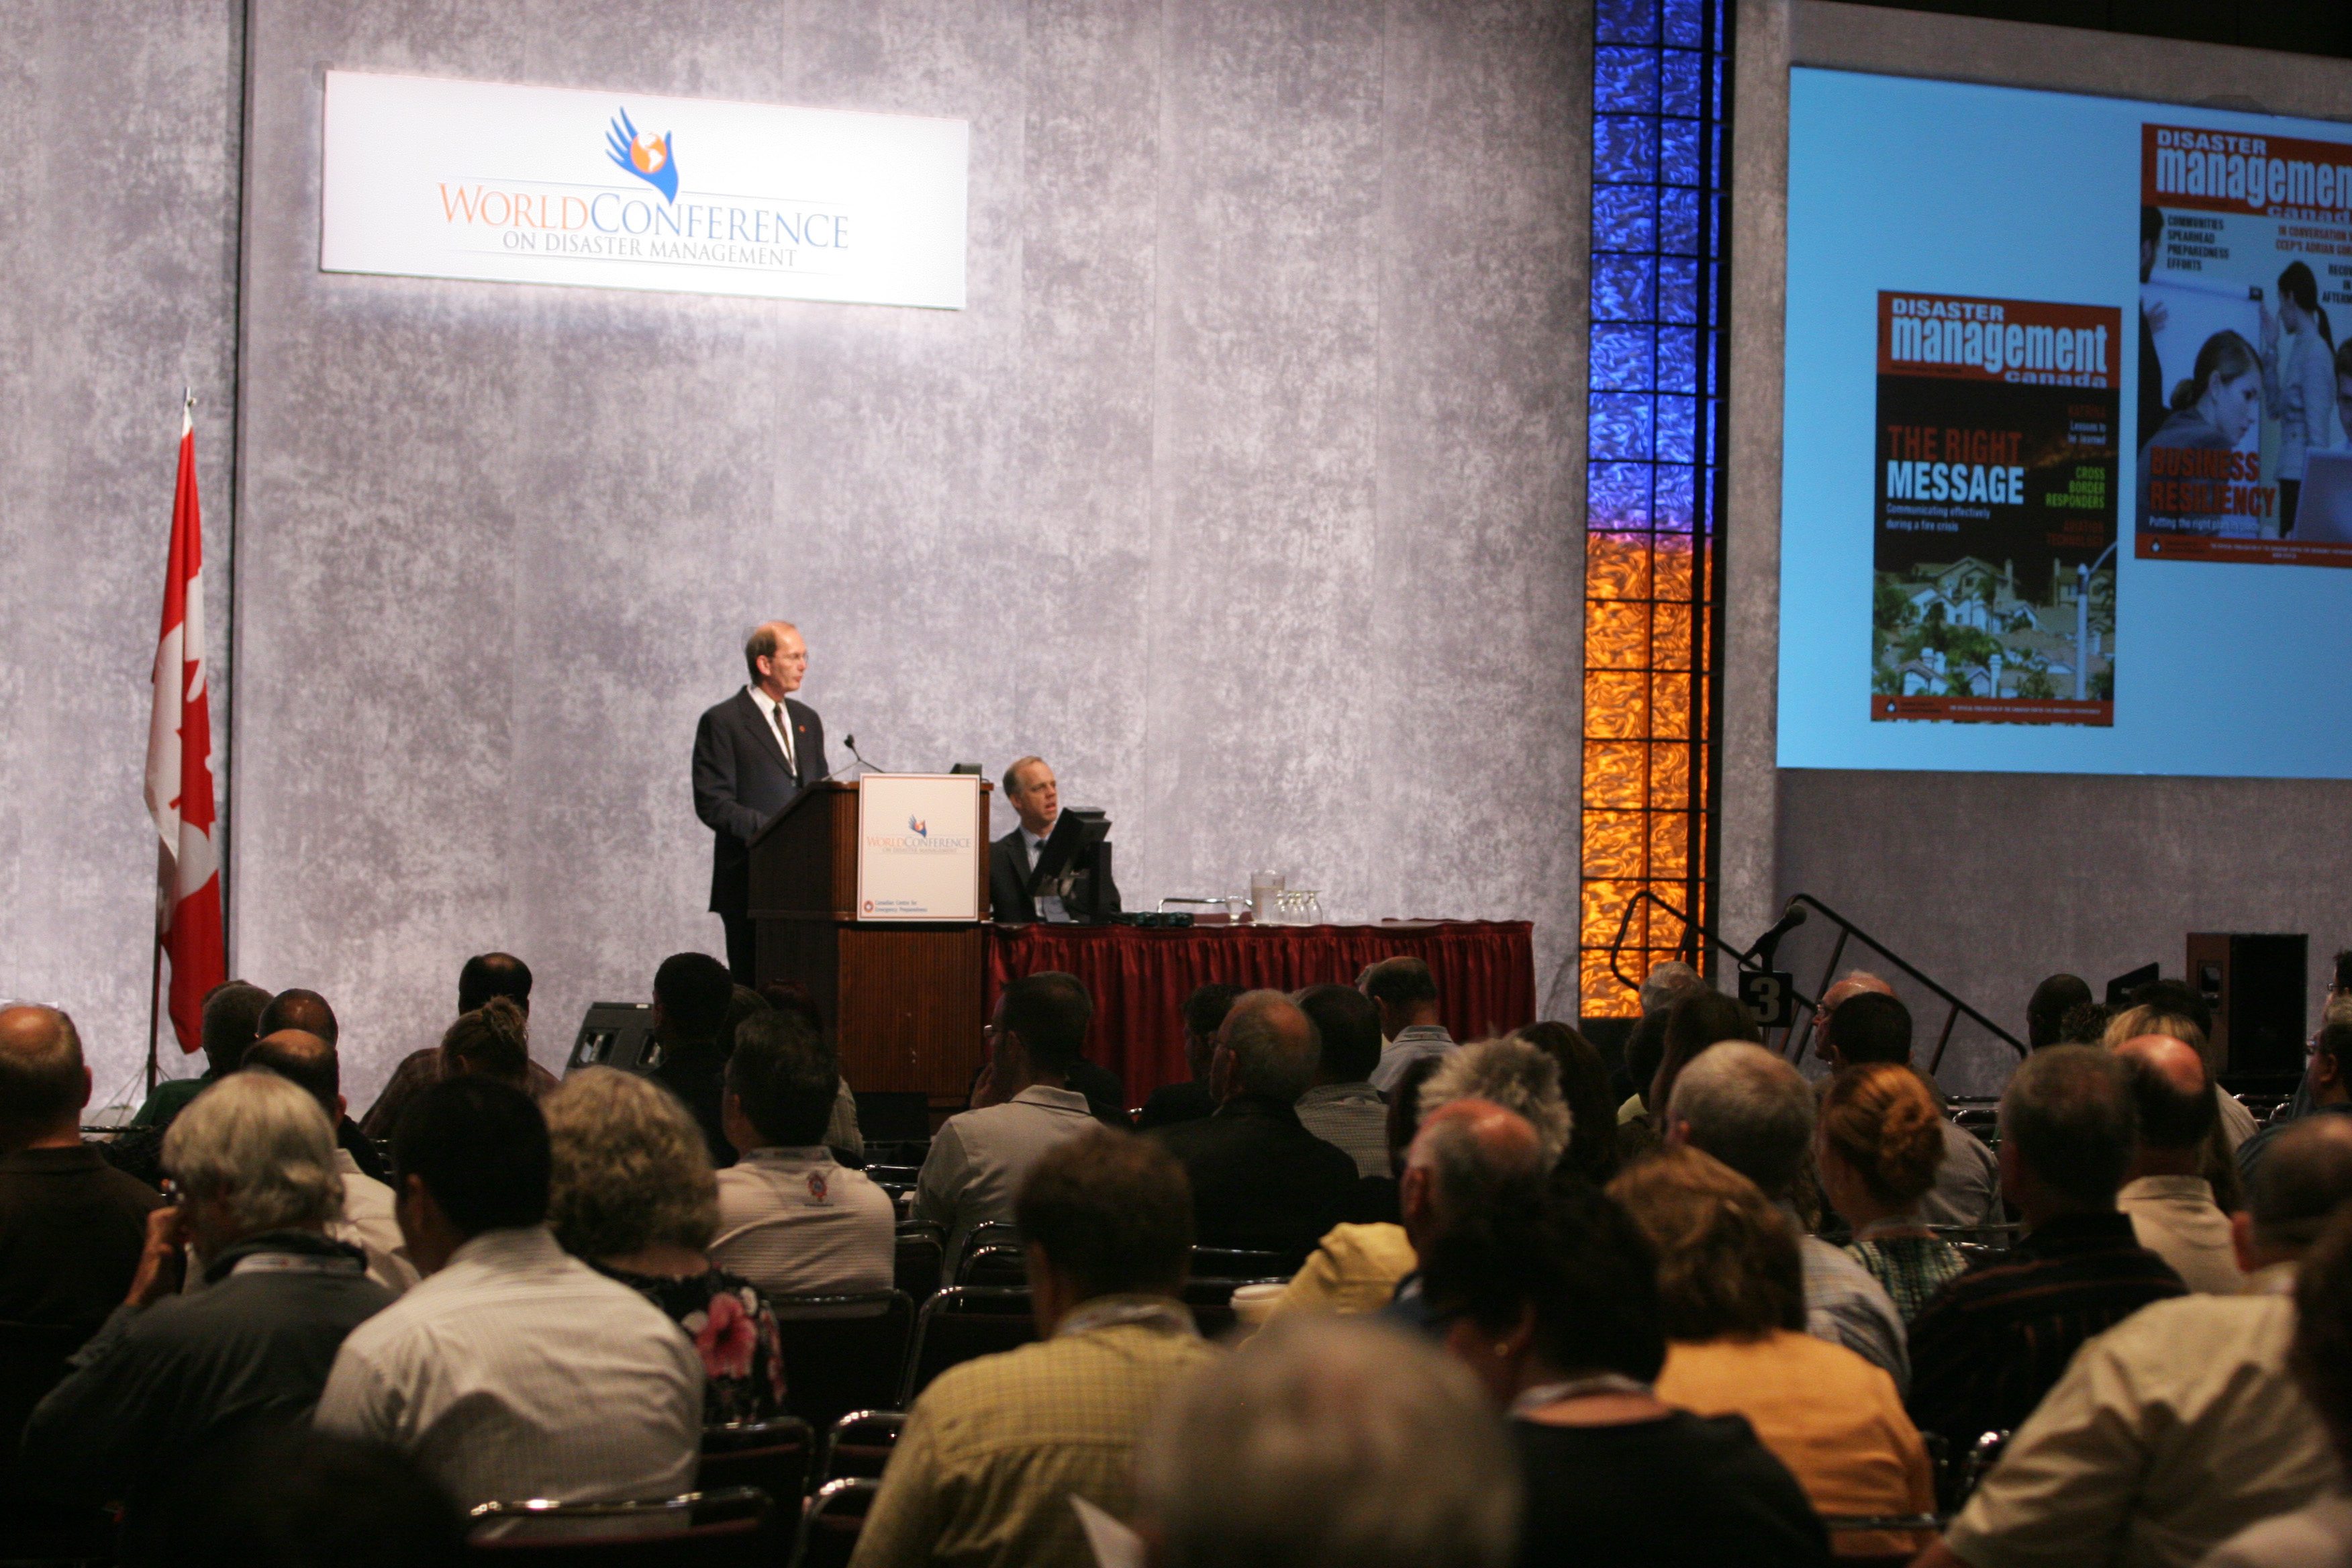 File image from the 2008 World Conference on Disaster Management